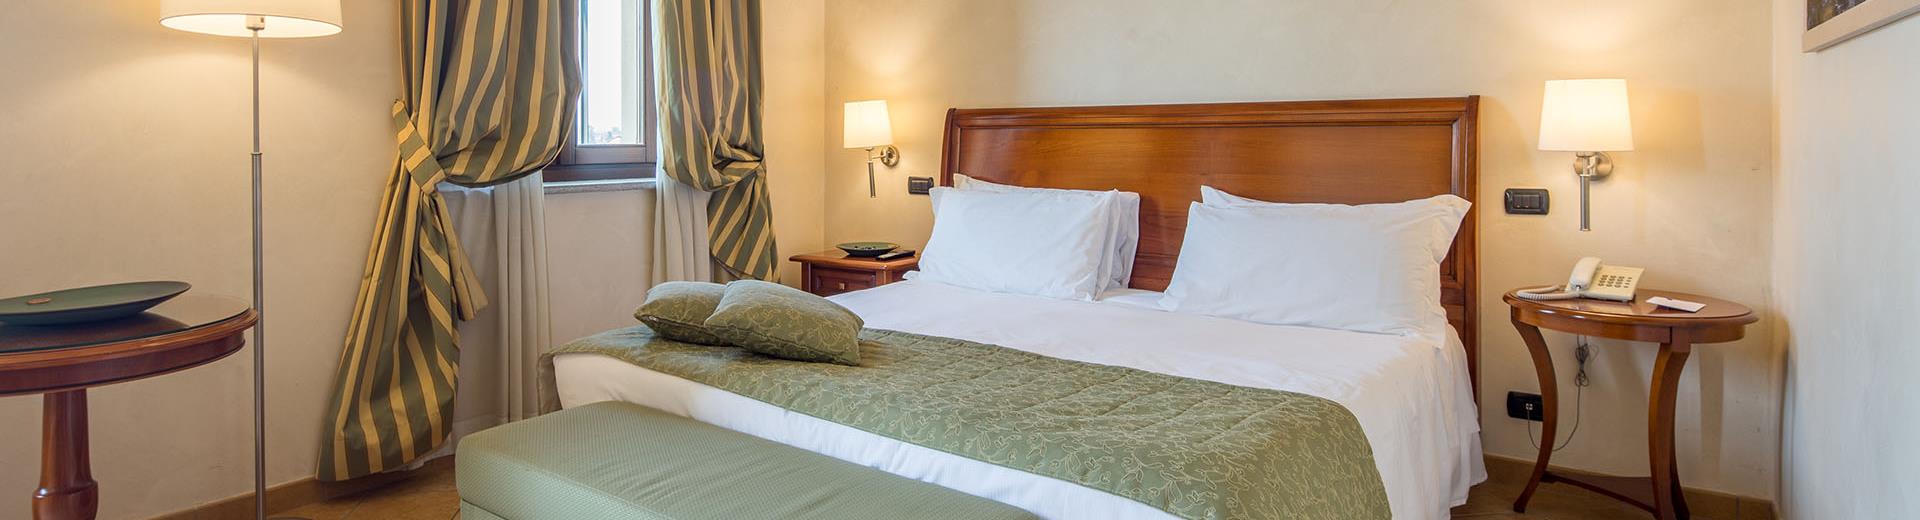 The Standard rooms of the Best Western Plus Hotel Le Rondini, a stone s throw from Turin and its airport, are created to gently wrap you in a chic and familiar atmosphere